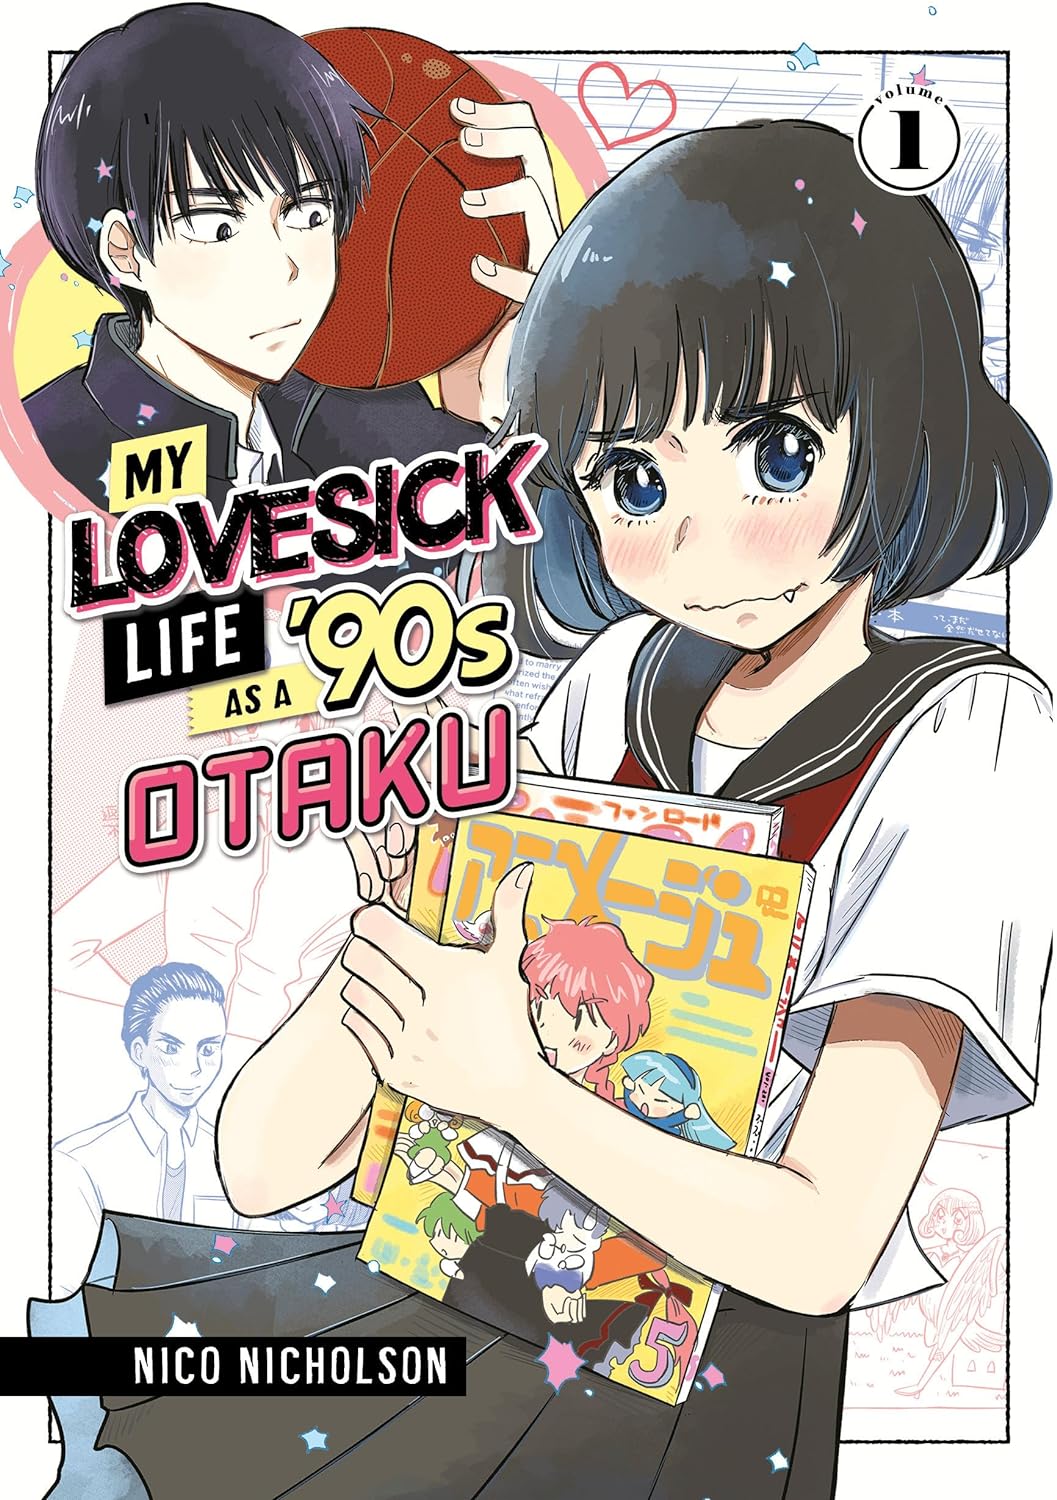 Cover of My Lovesick Live as a '90s Otaku, showing a girl in the foreground clutching two manga magazines and showing a small fang as she grimaces; behind her in an inset is a boy holding a basketball.